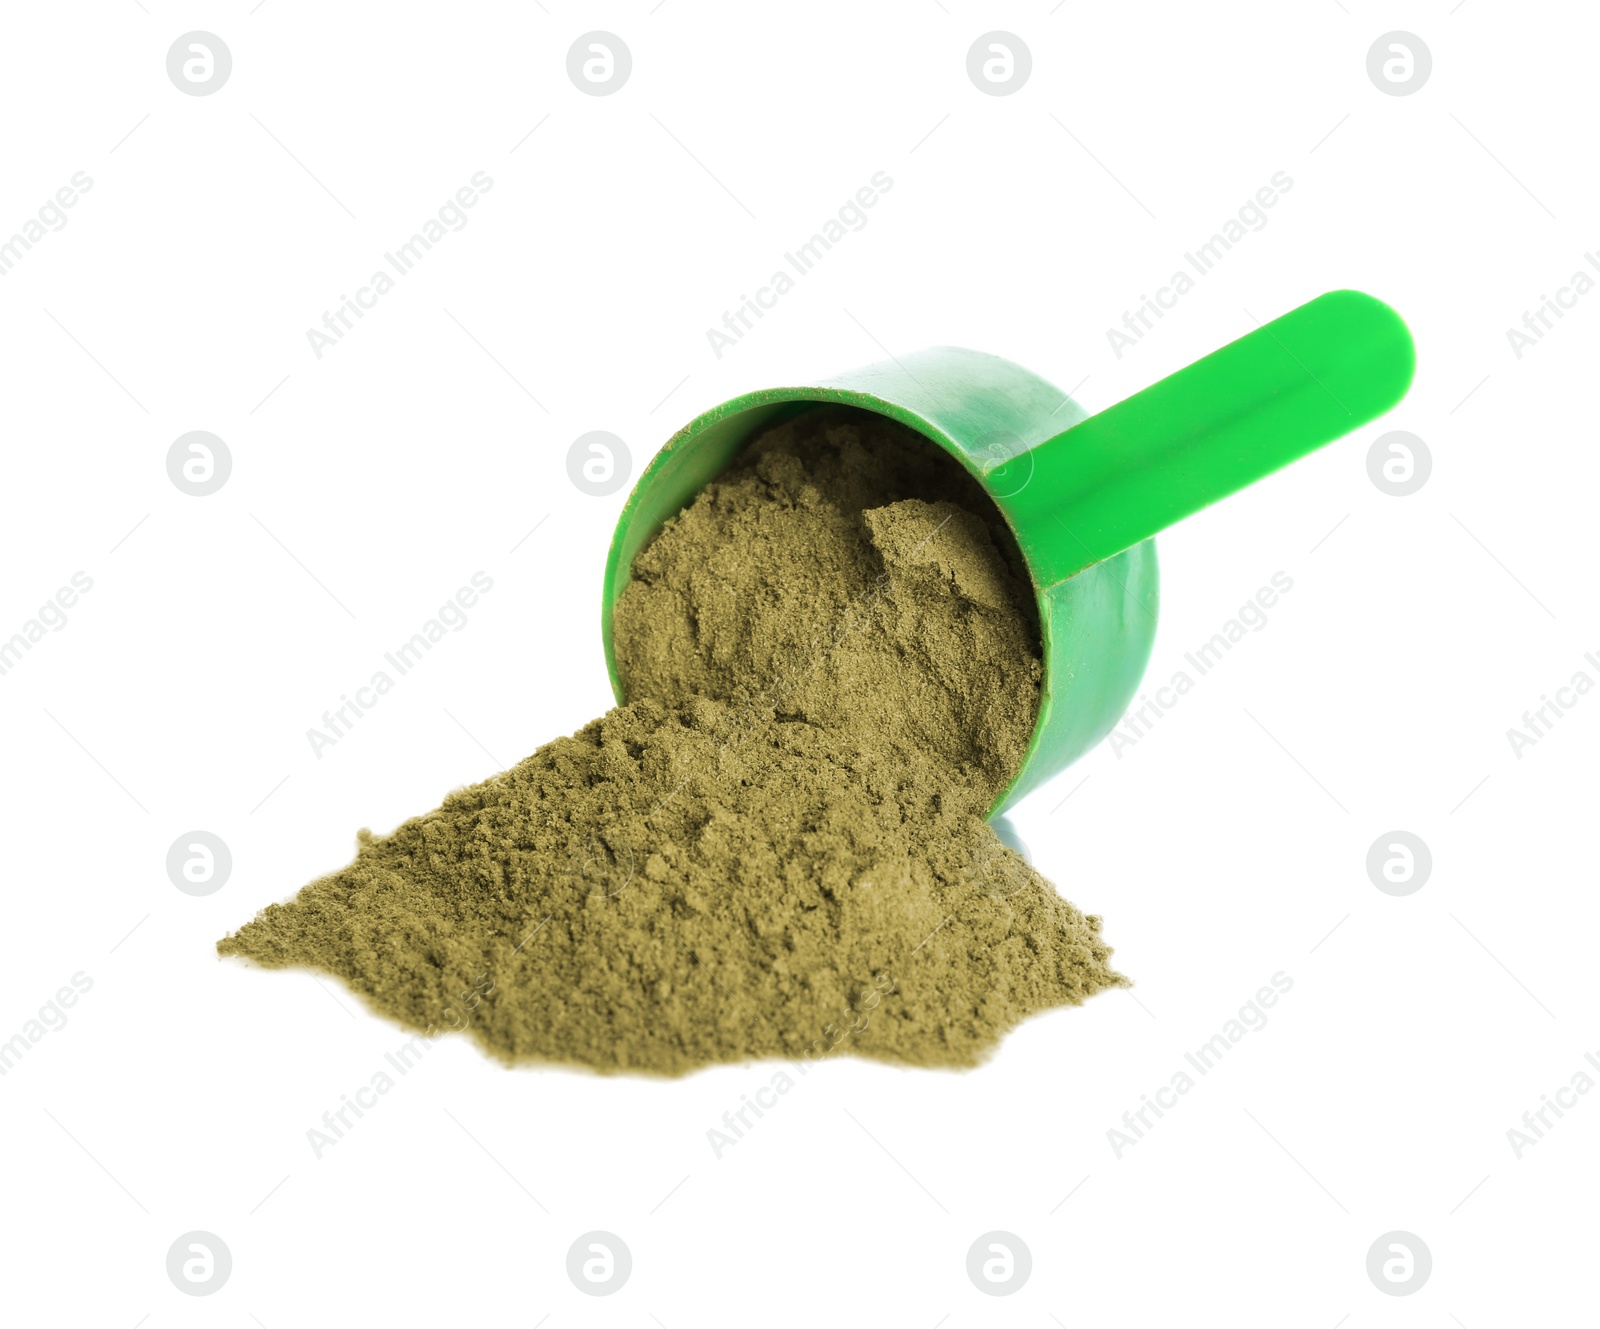 Photo of Hemp protein powder and measuring scoop on white background